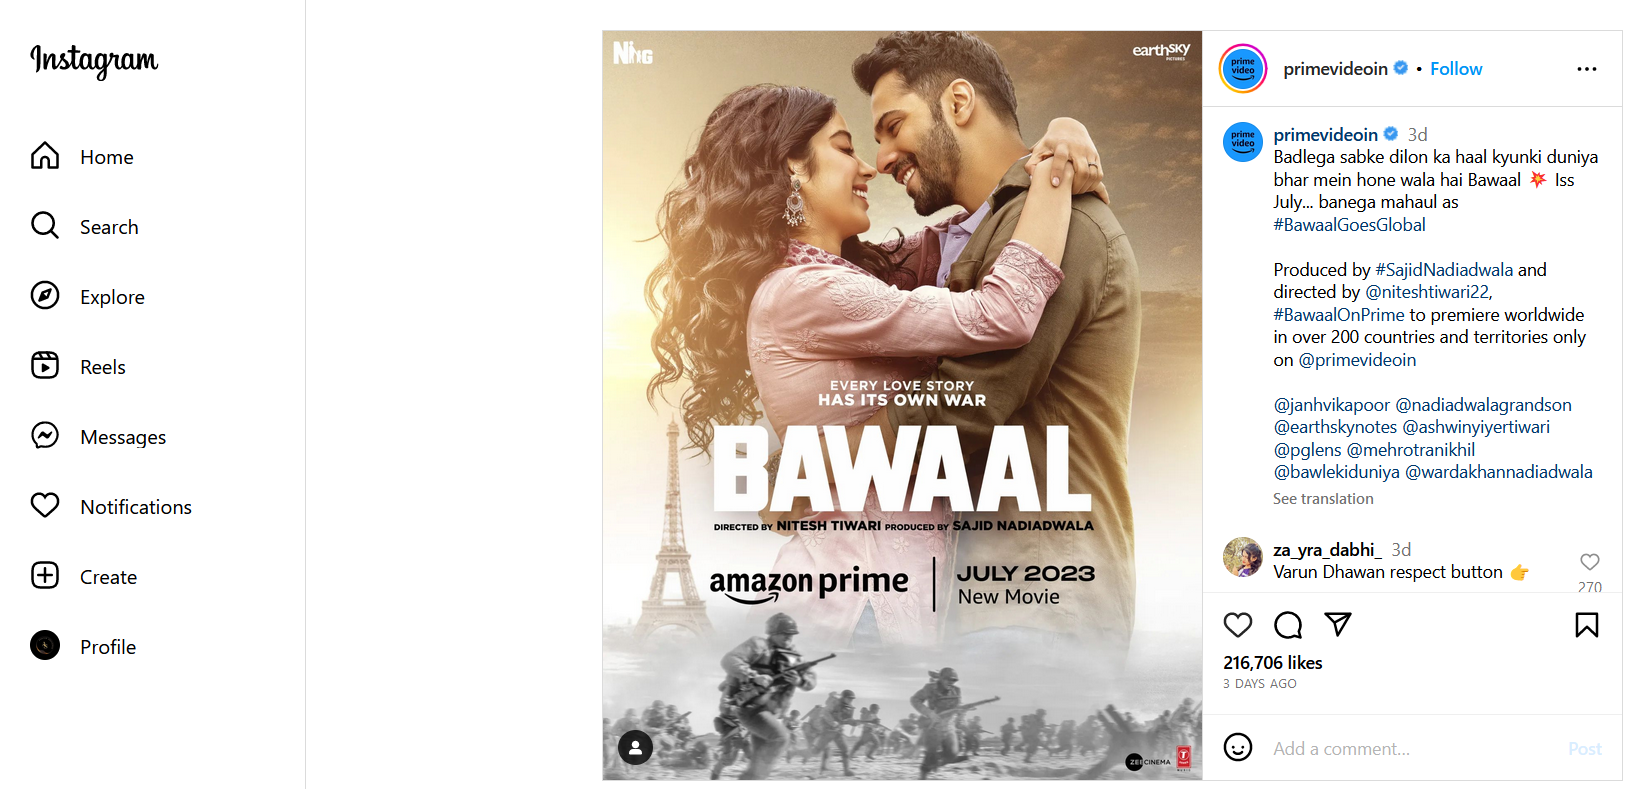 Bawaal premiere at Eiffel Tower in 2023